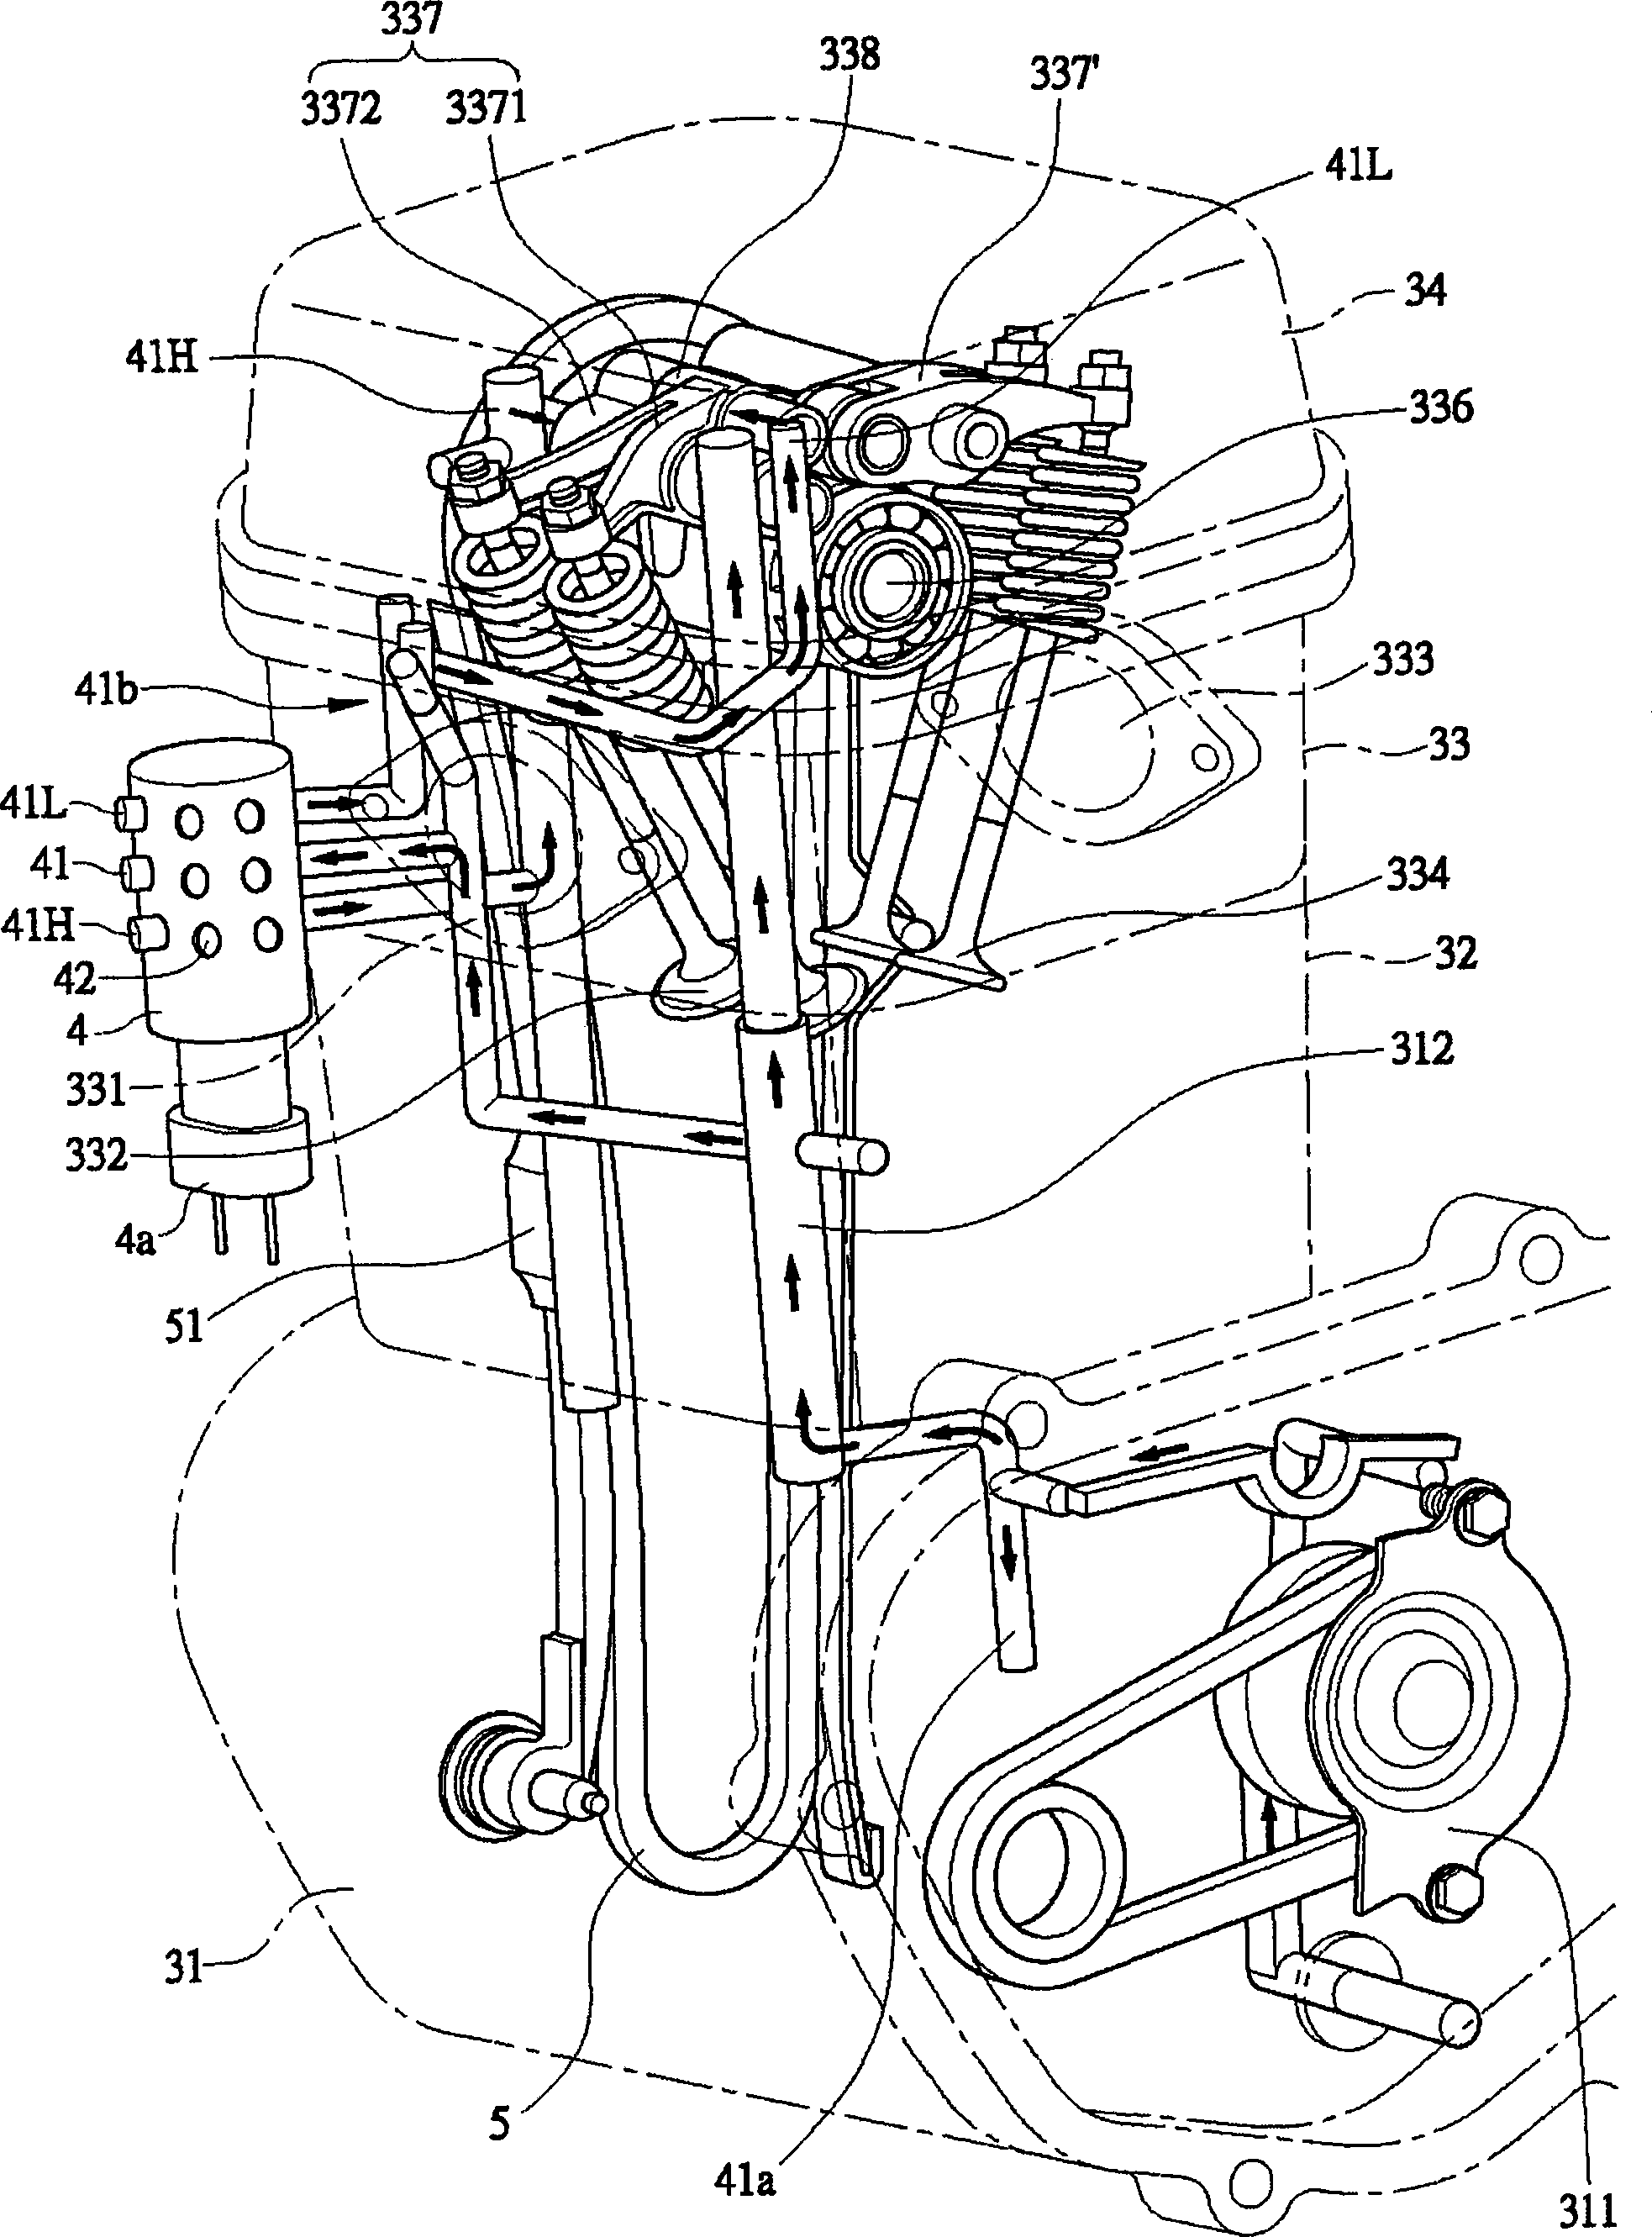 Configuration structure of variable valve lift mechanism and oil controlled valve of engine